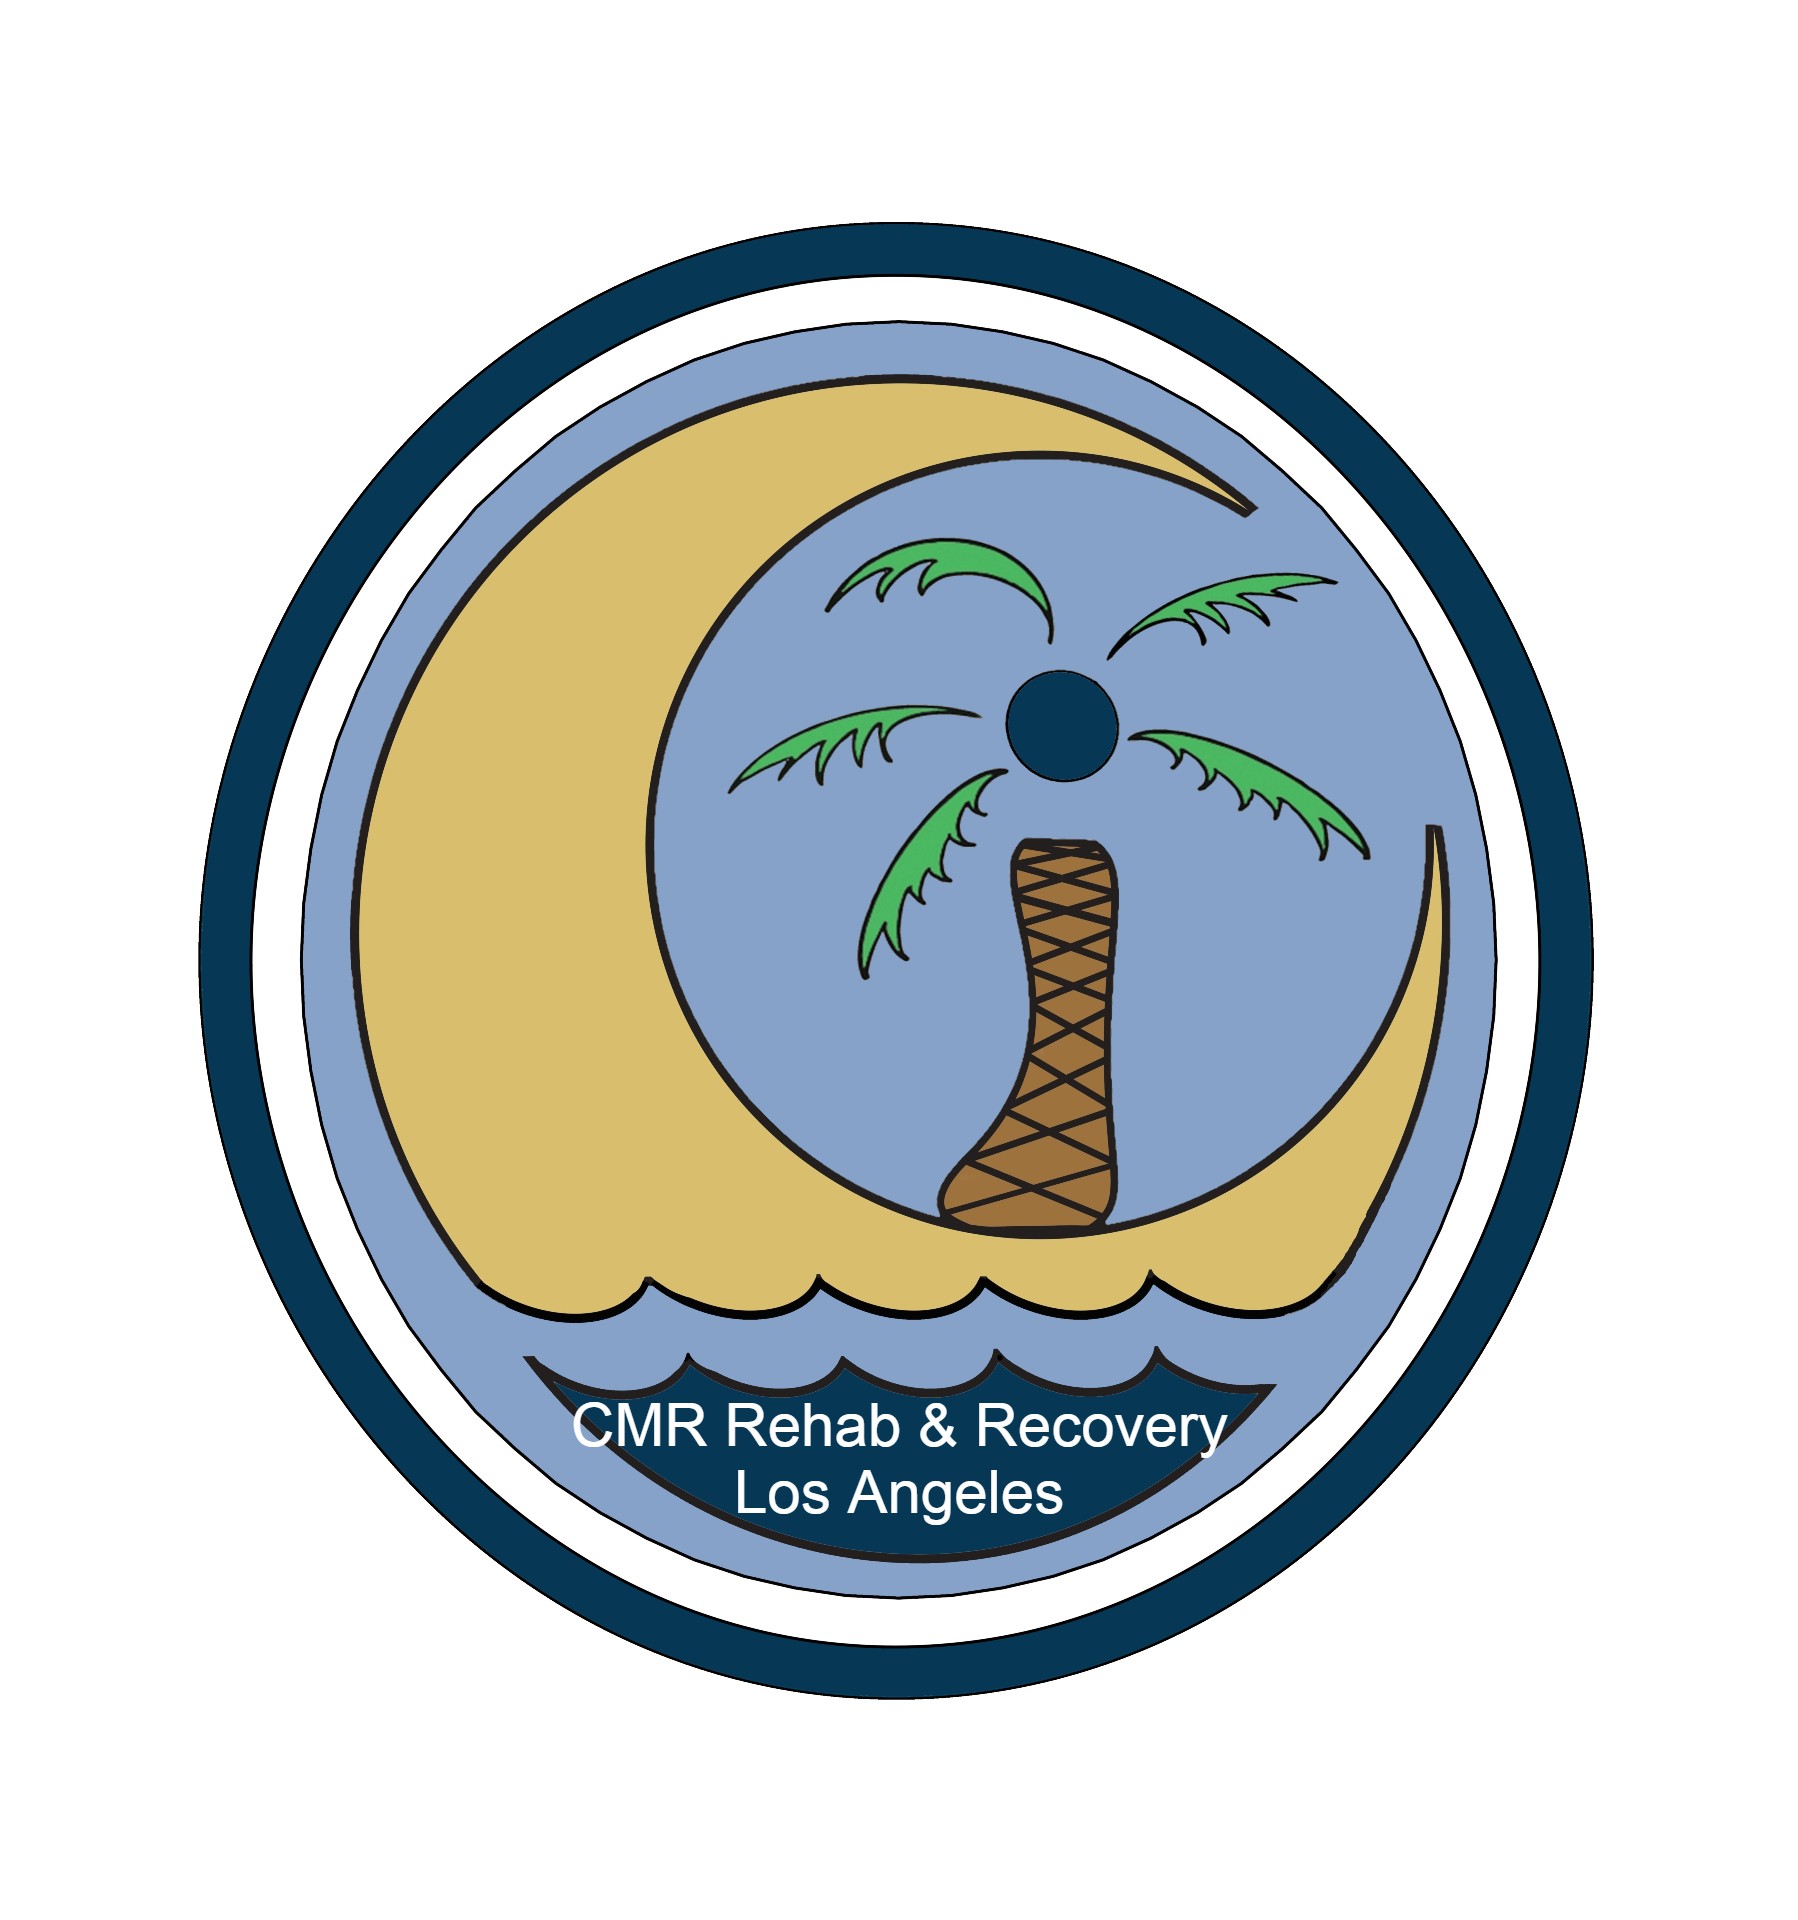 CMR Rehab & Recovery of Los Angeles Outlines Details About Its Addiction Treatment Programs